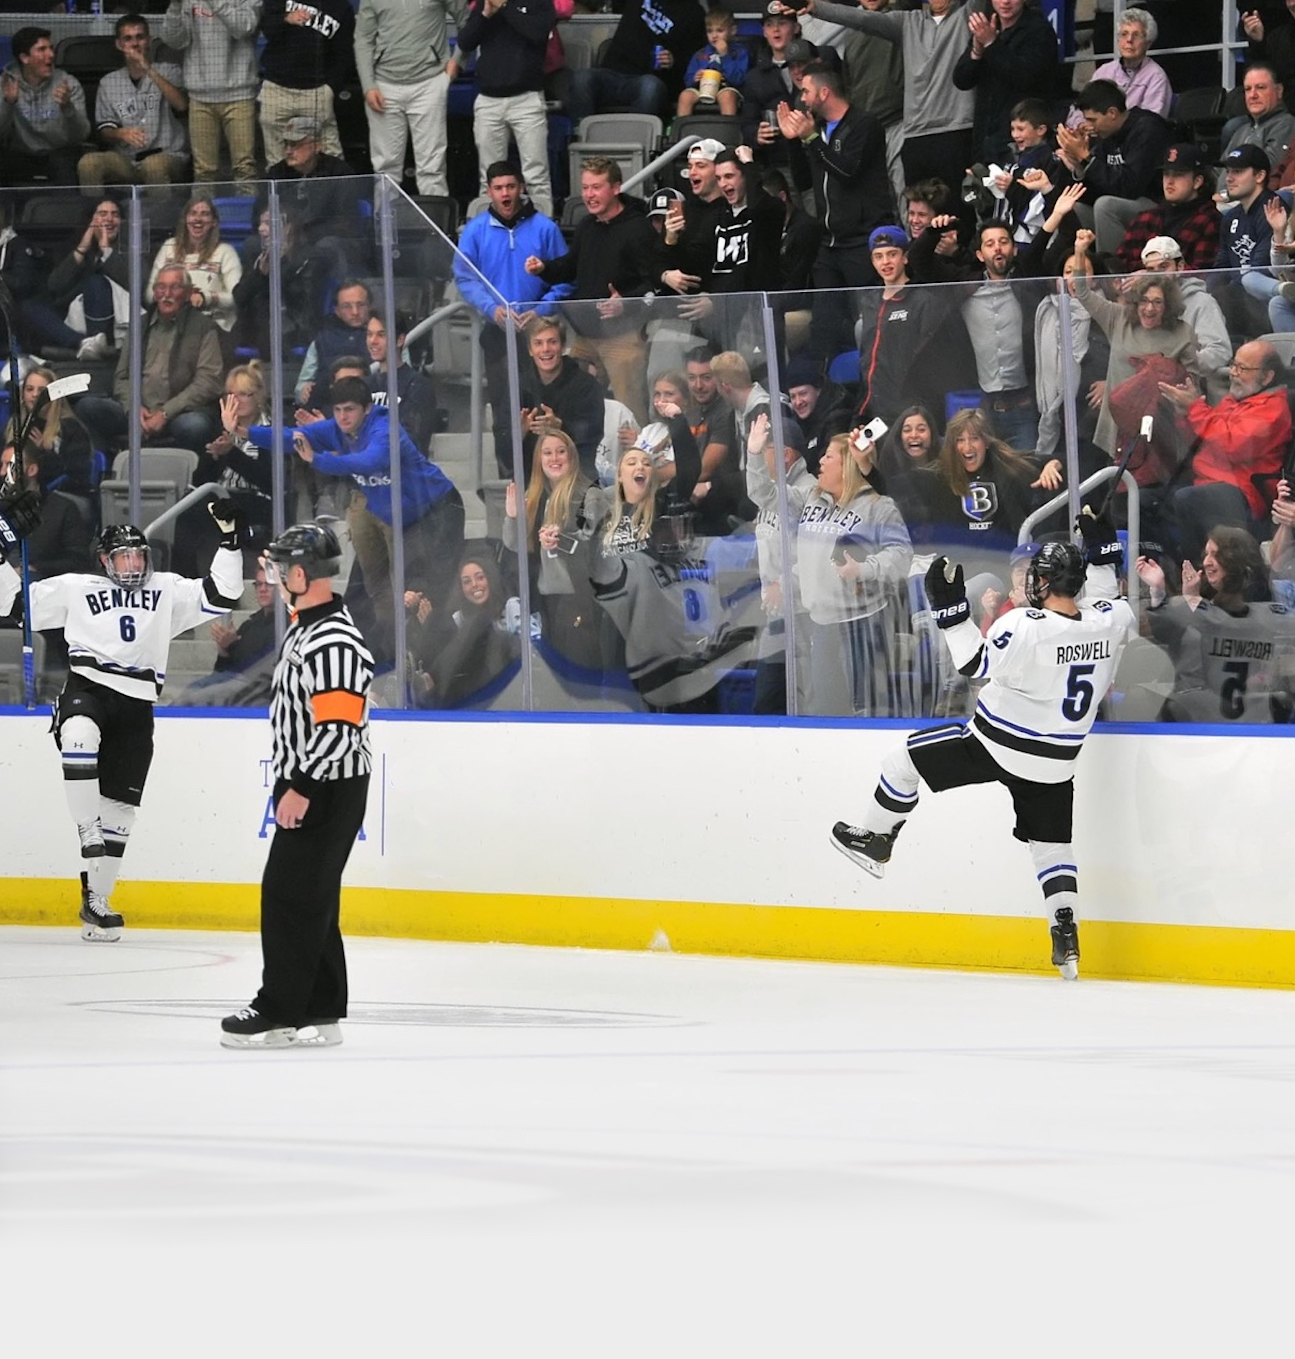 Ethan Roswell scores a hockey goal and celebrates